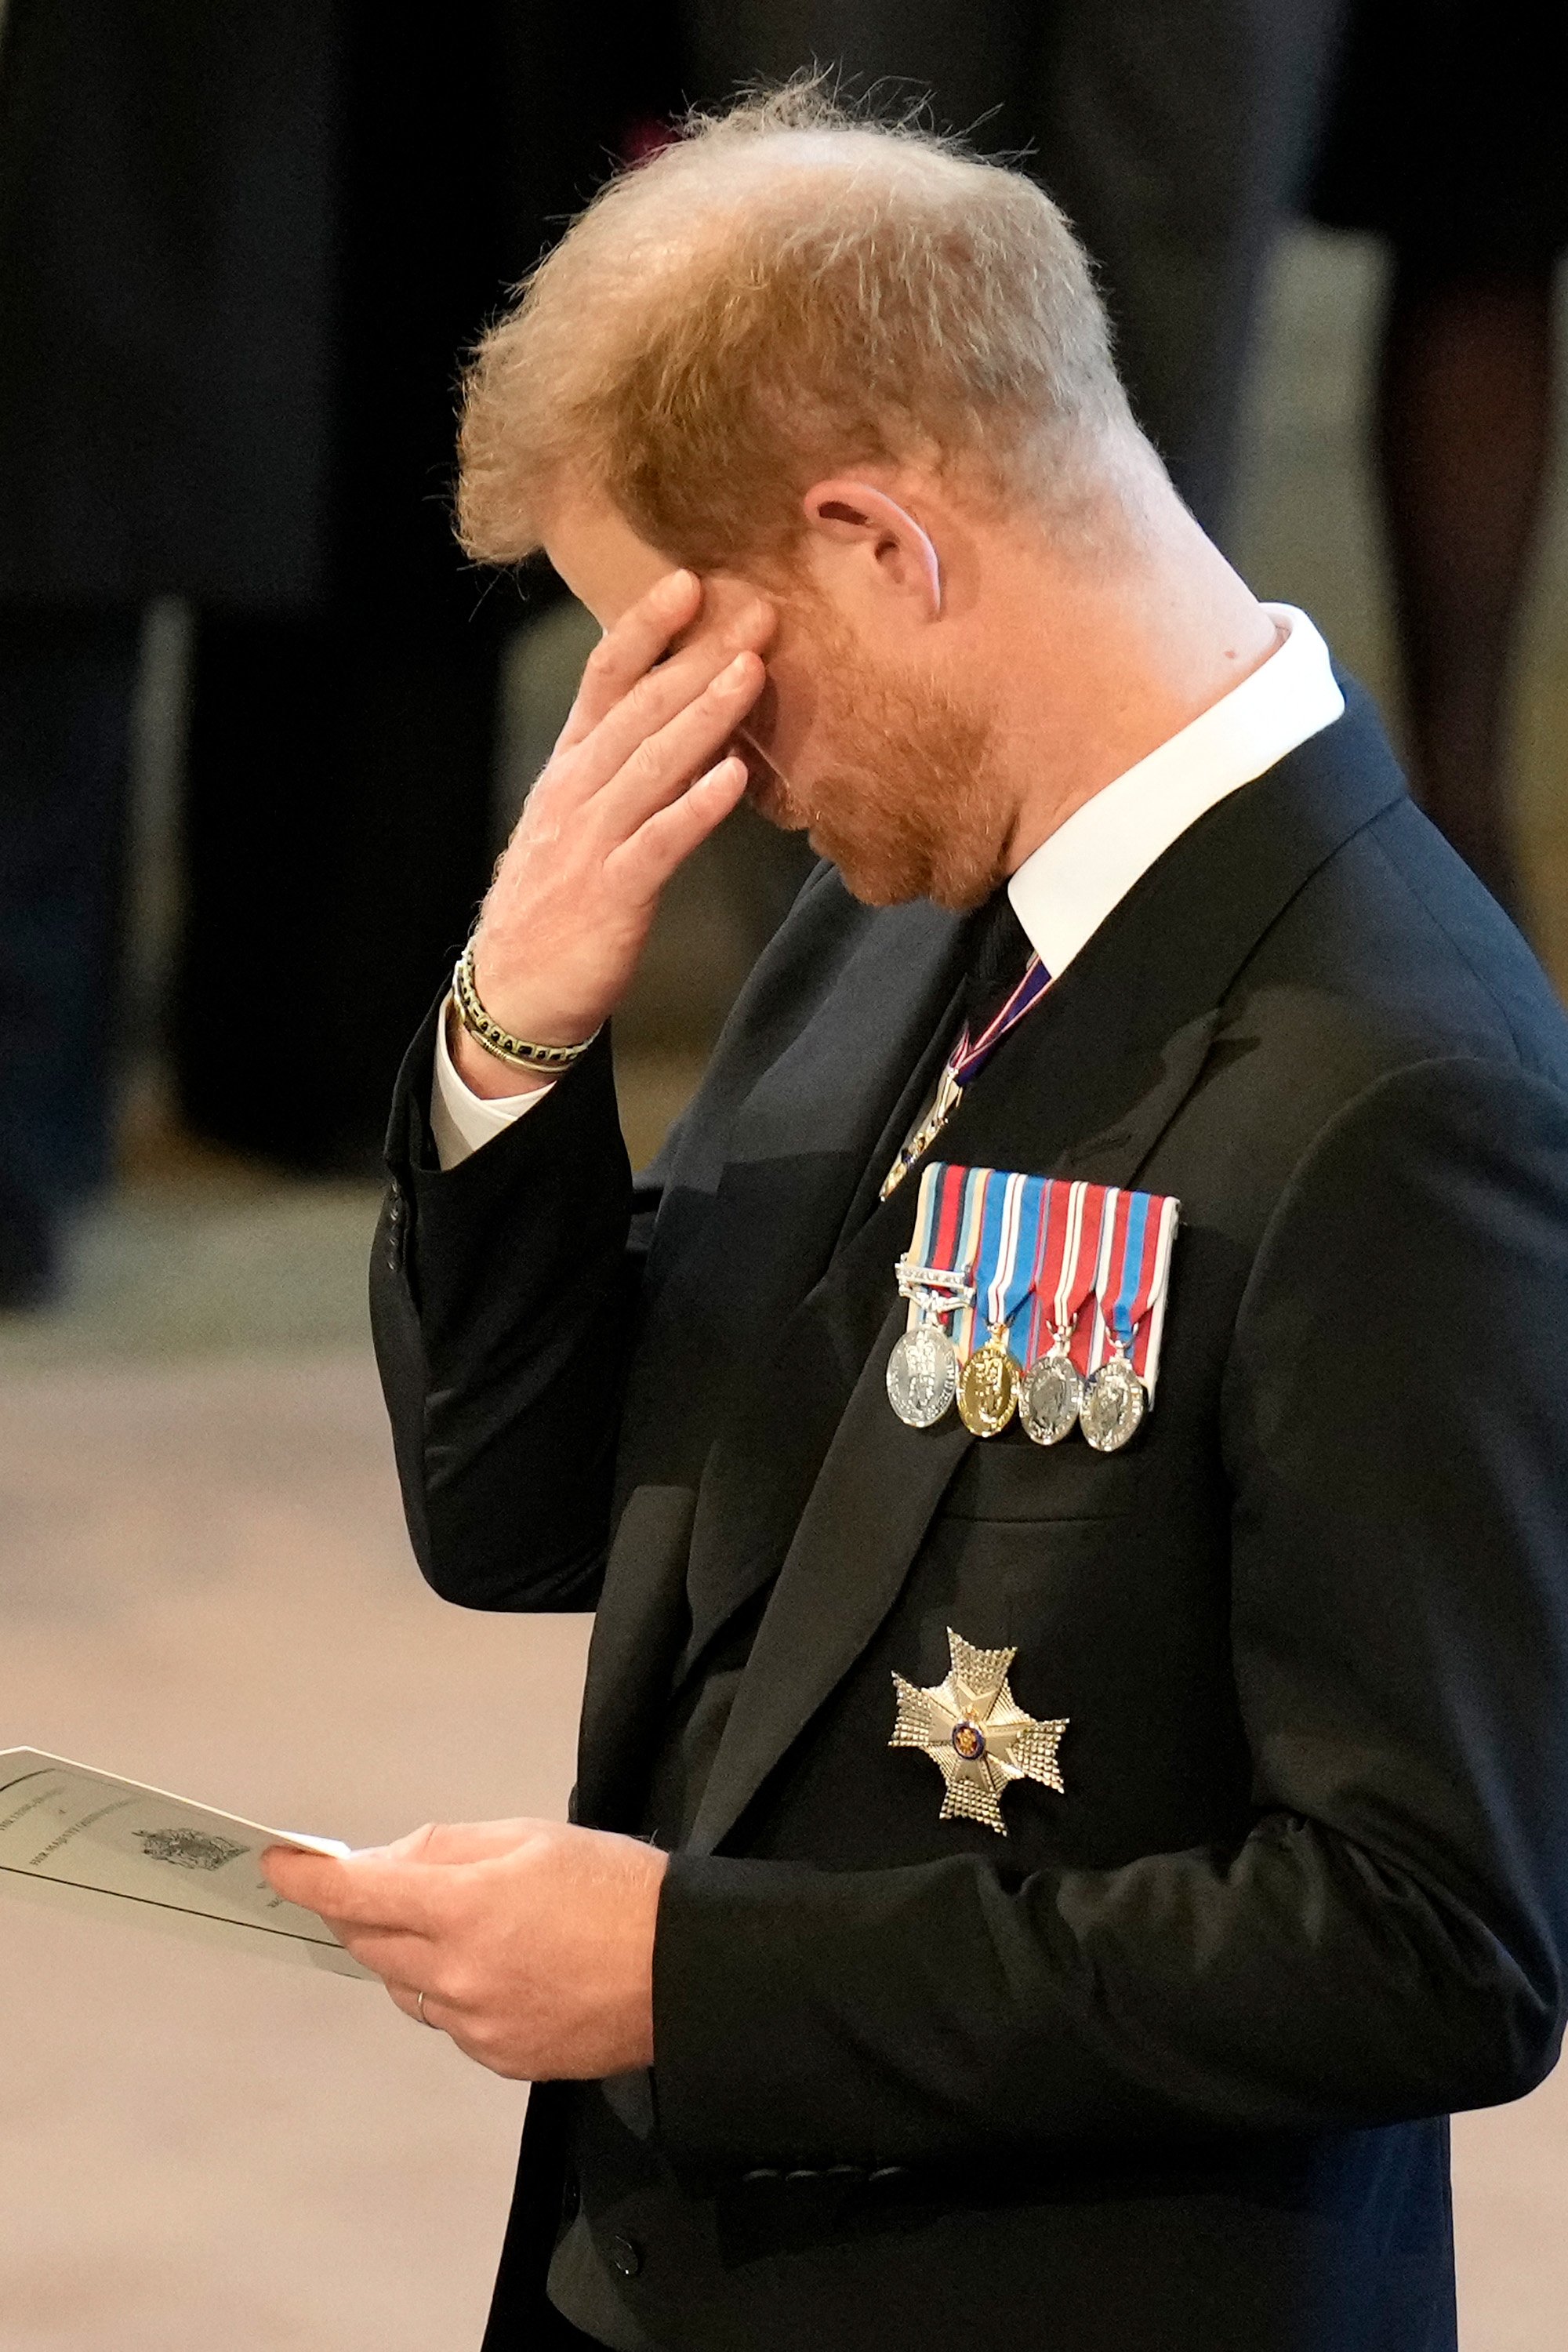 Prince Harry, Duke of Sussex attends a service for the reception of Queen Elizabeth II's coffin inside Westminster Hall, on September 14, 2022. | Source: Getty Images